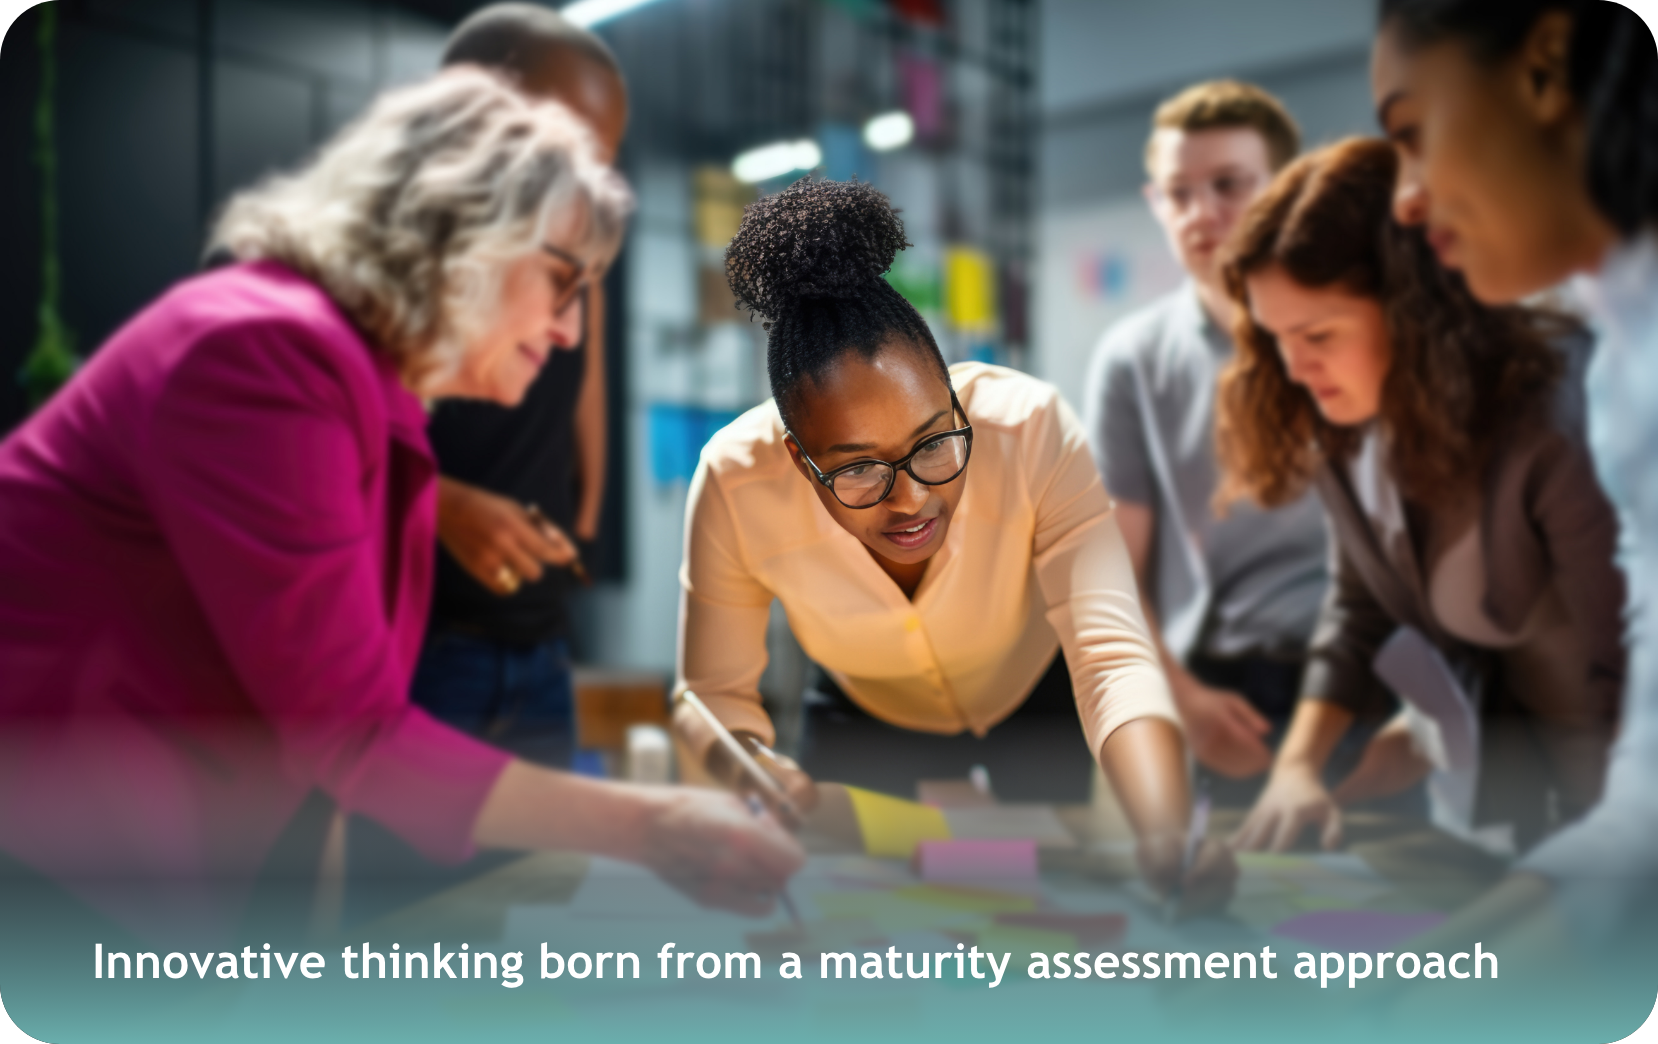 Innovative thinking born from a maturity assessment approach